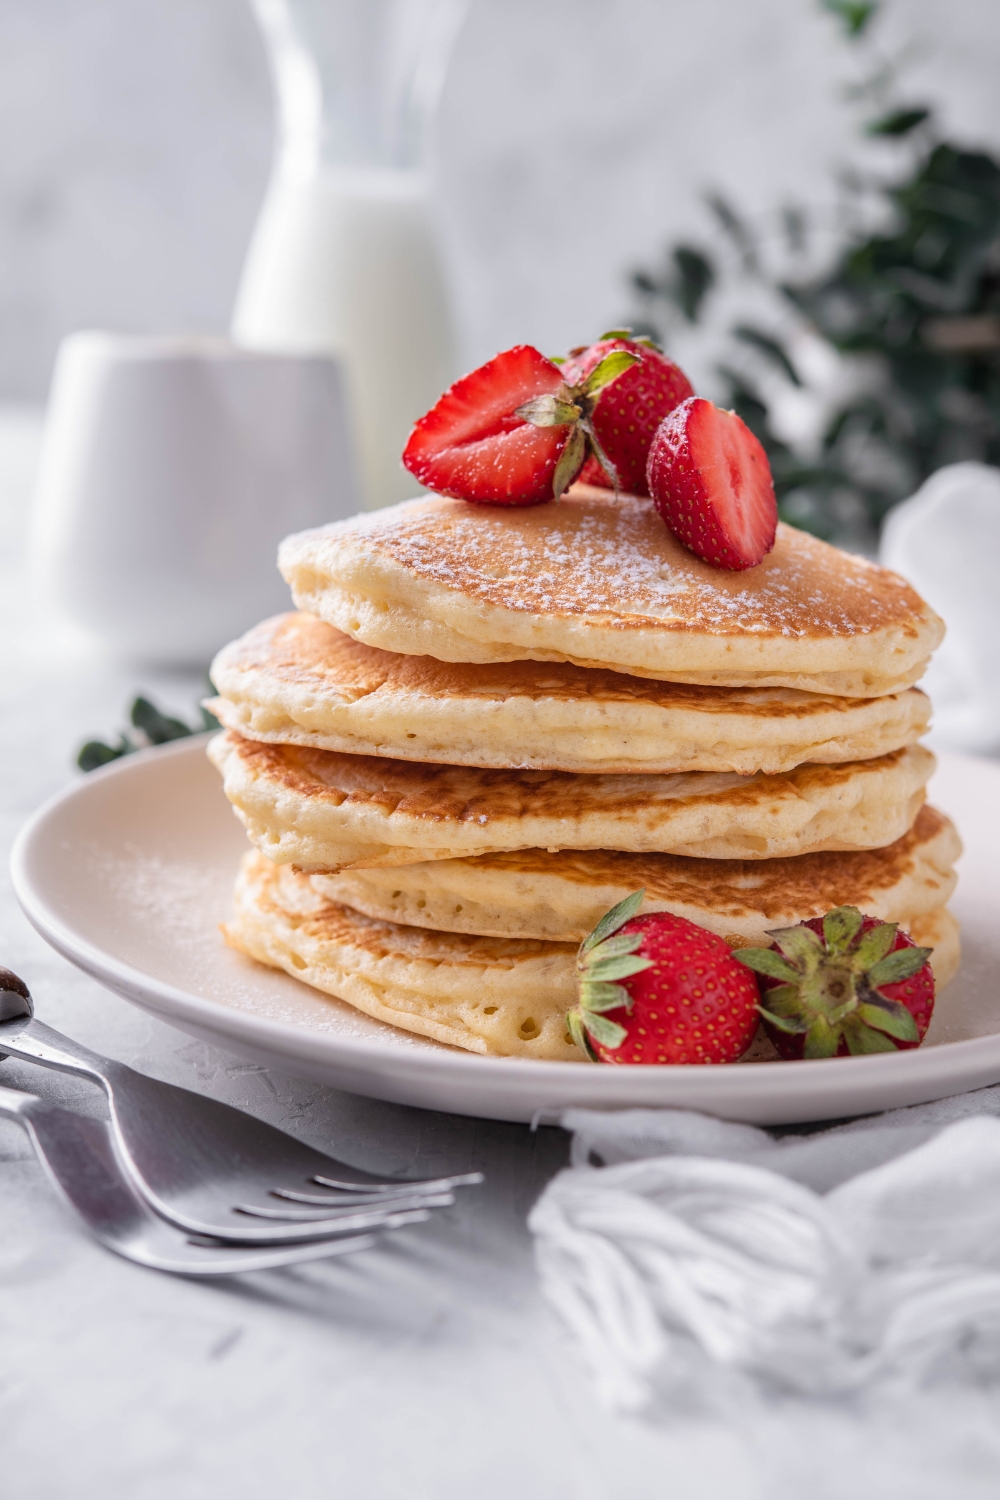 A stack of pancakes on a plate with sliced strawberries sprinkled with powdered sugar.